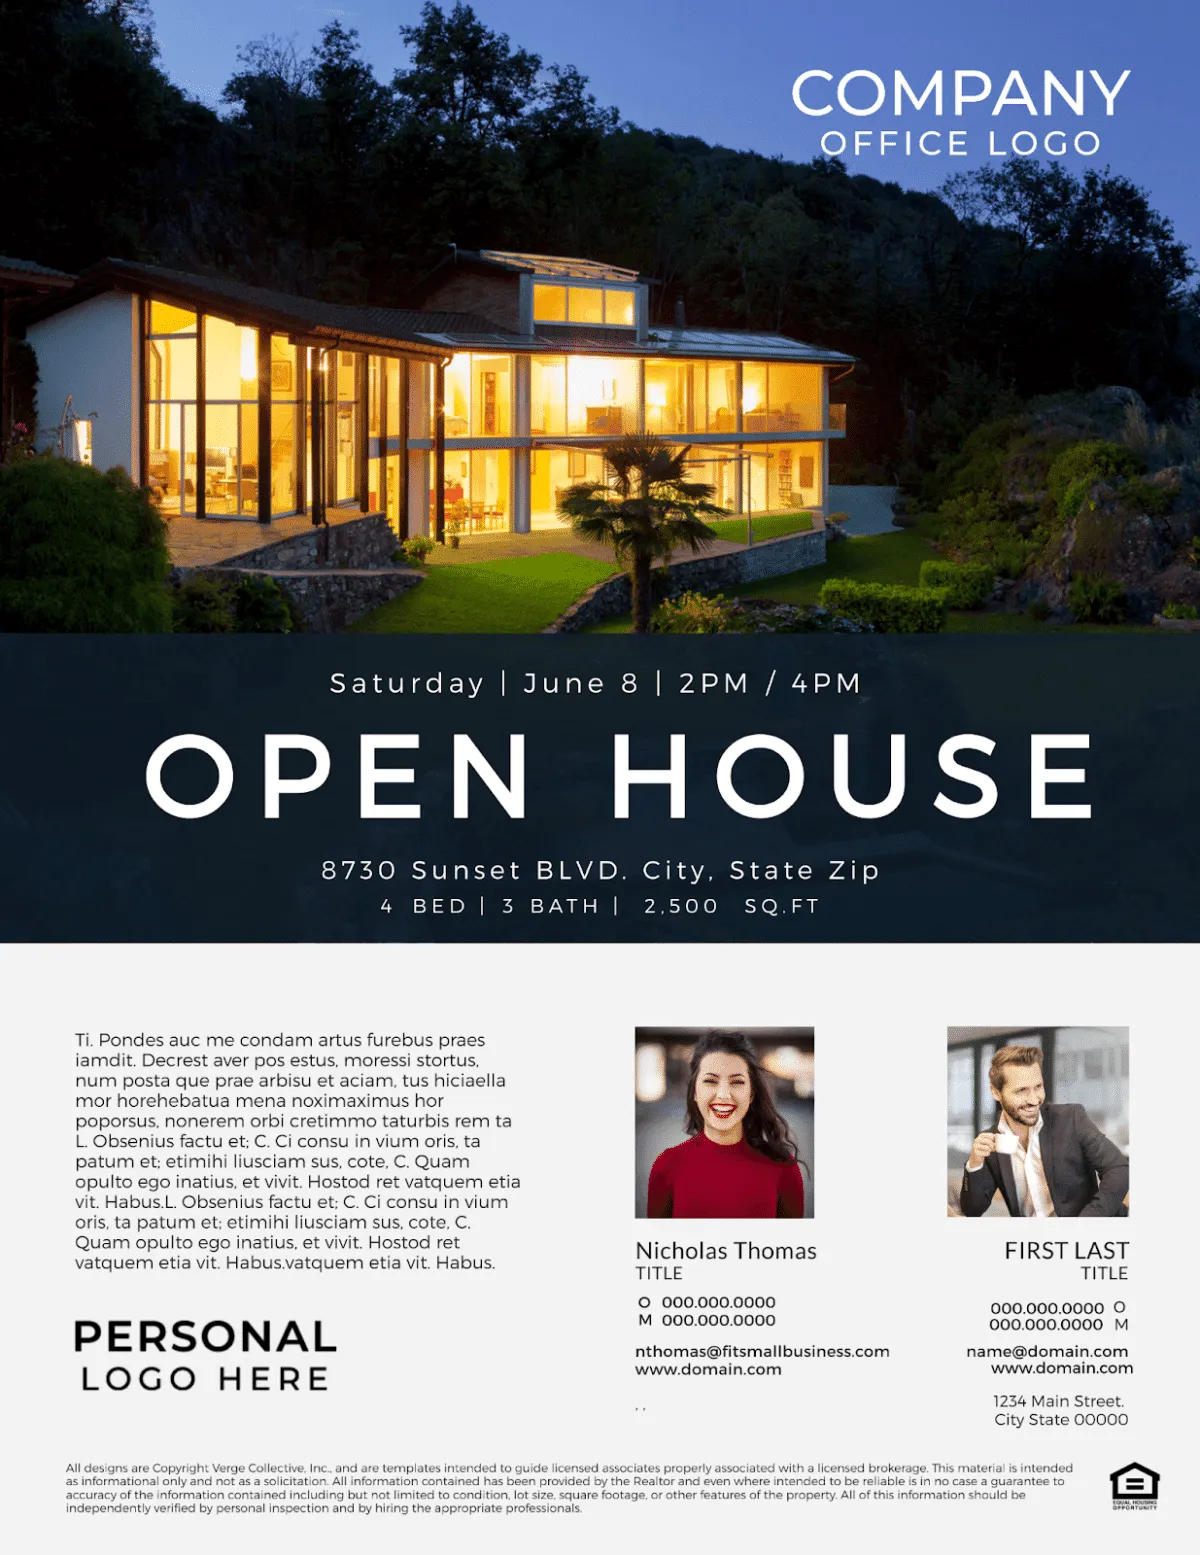 open house email template with multiple photos